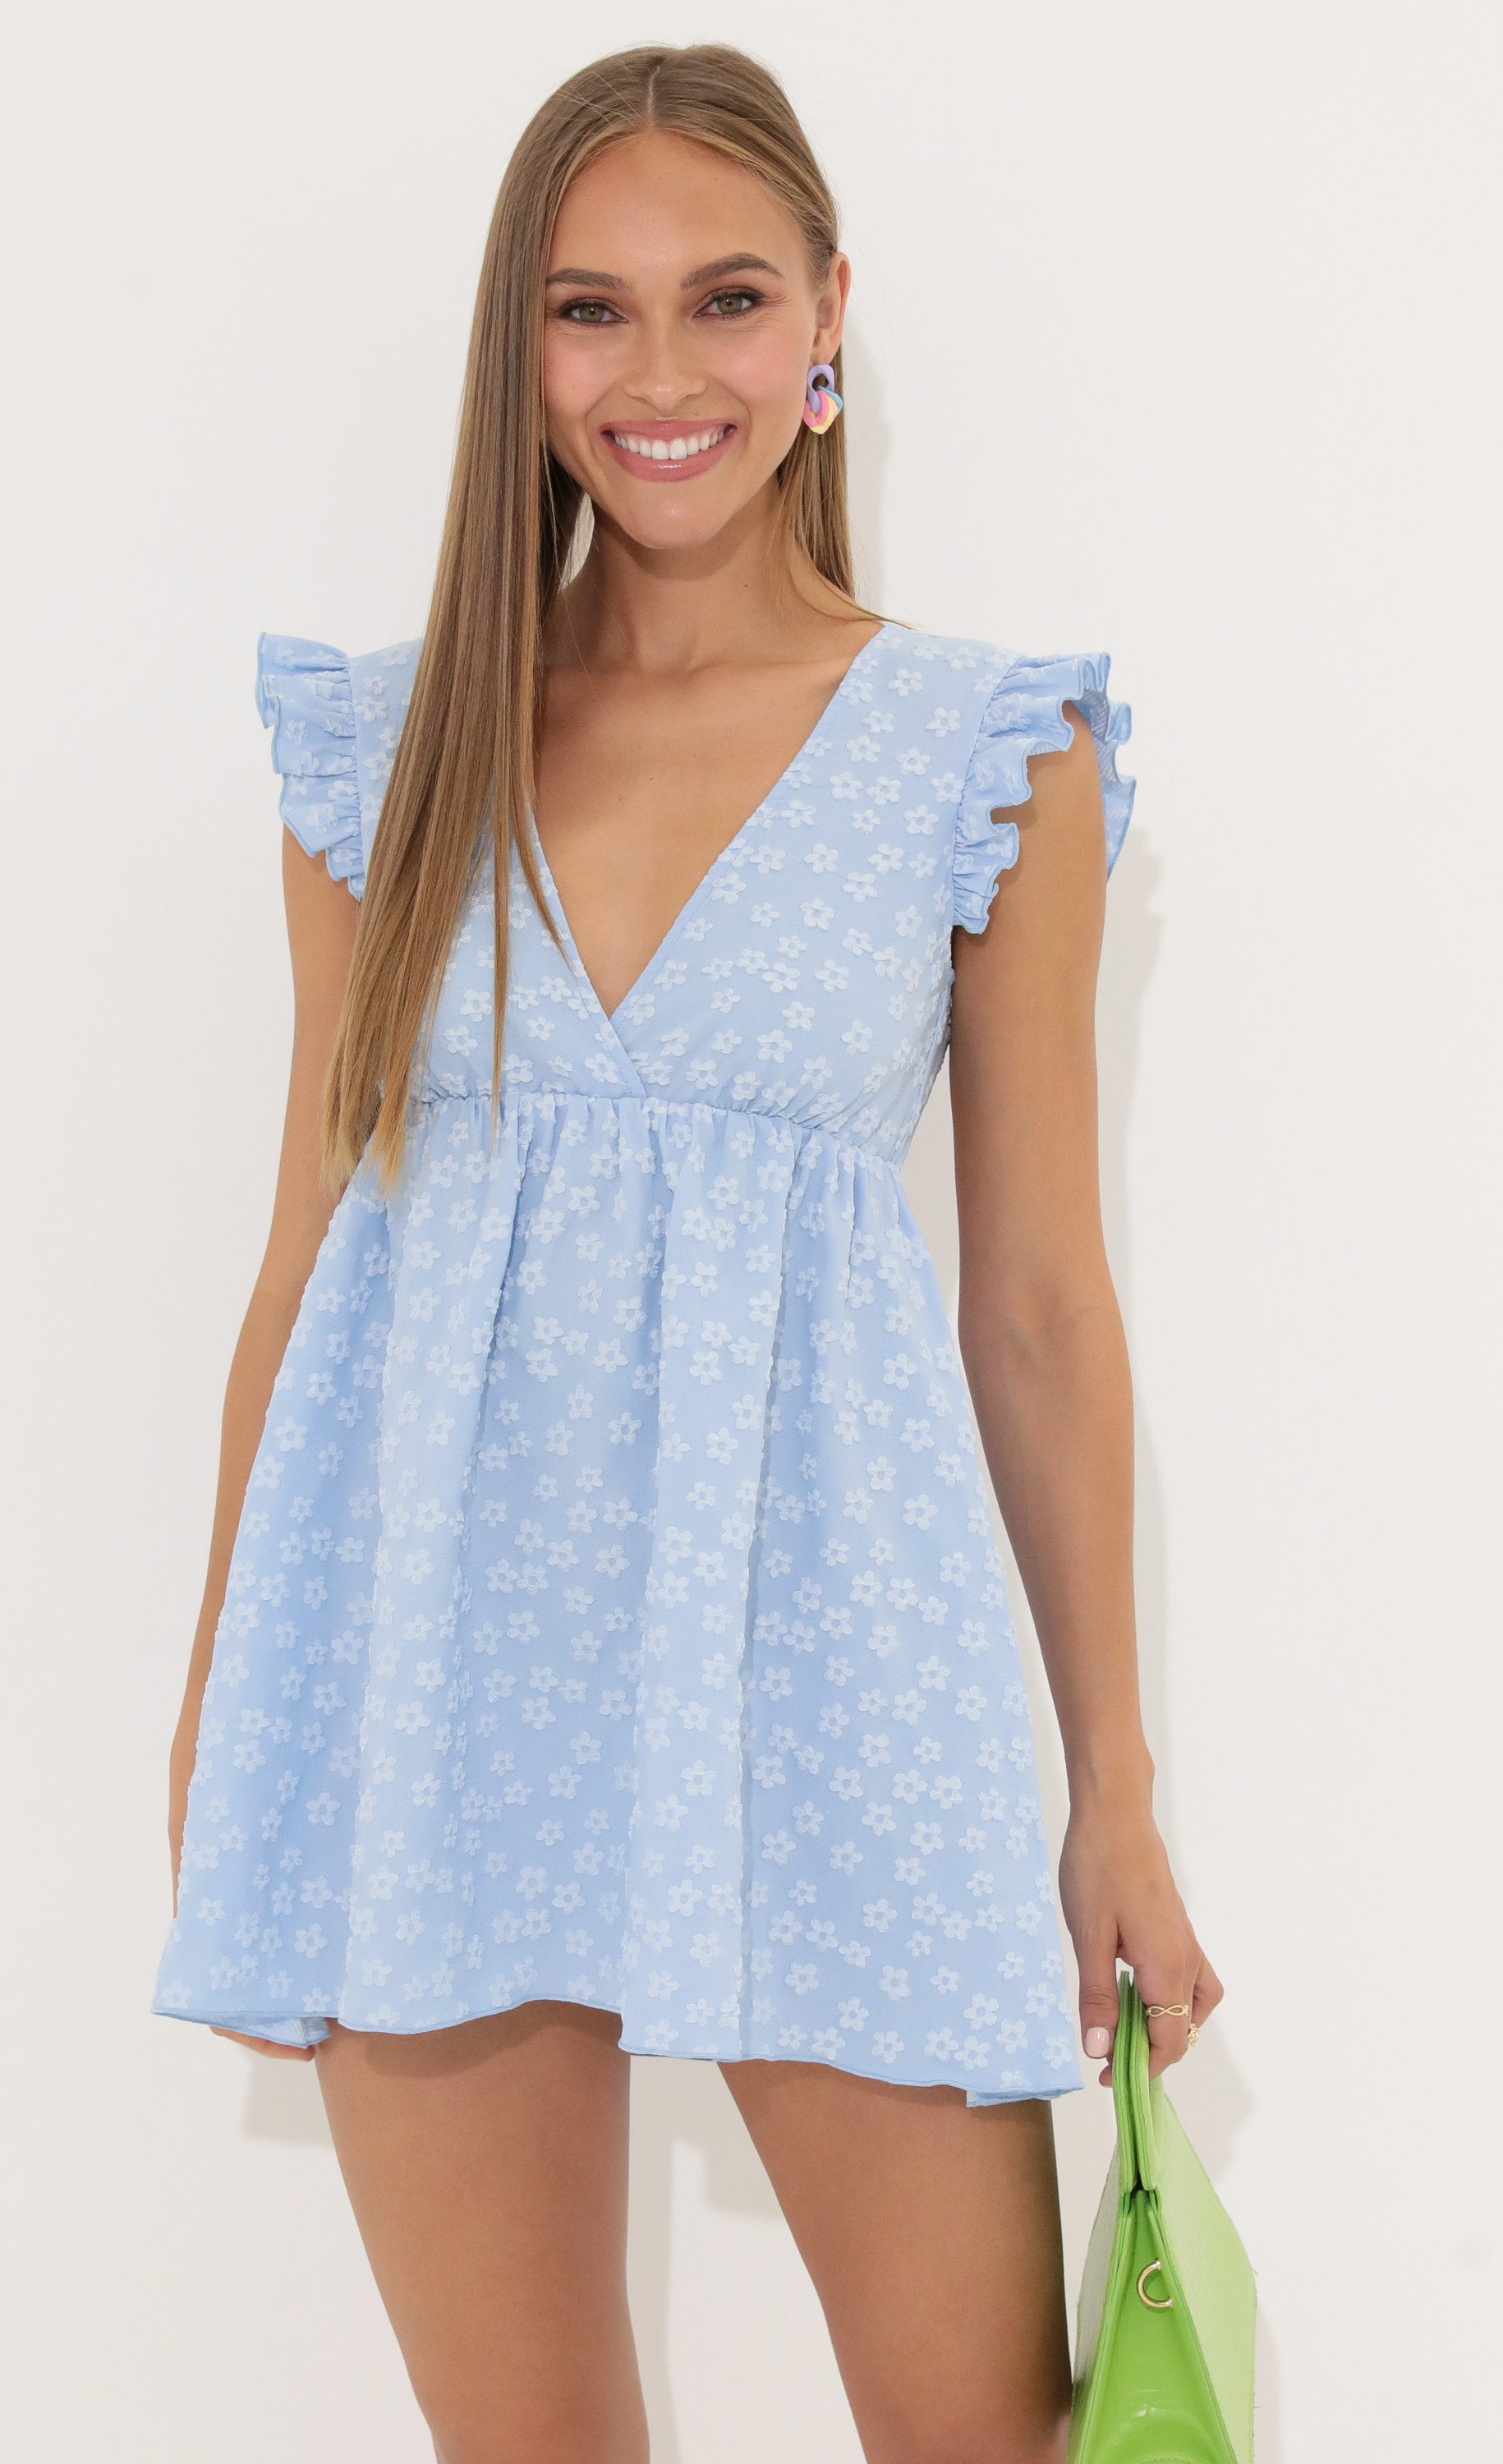 Floral Jacquard Baby Doll Dress in Blue